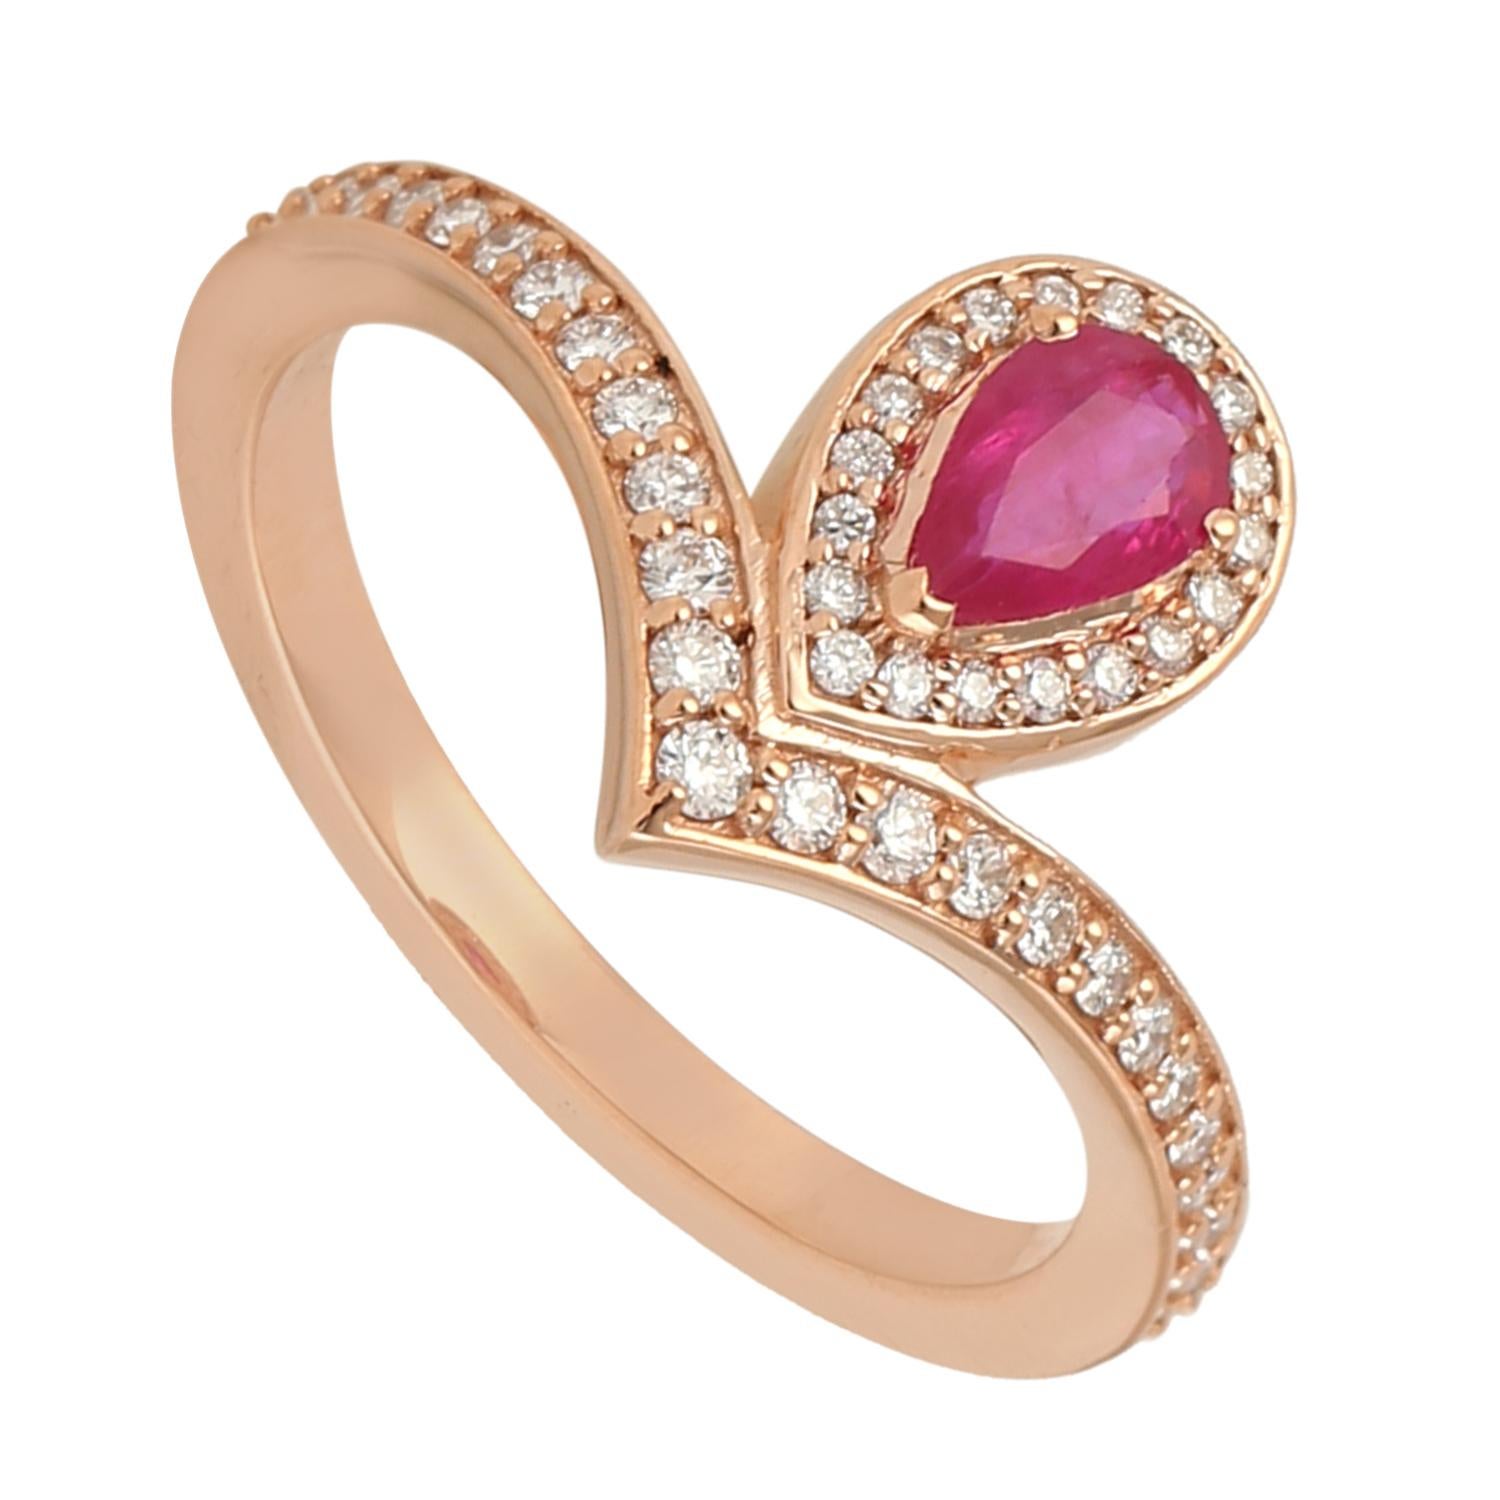 Artisan Pear Shaped Ruby Ring Accented With Diamonds Made In 18k Rose Gold For Sale